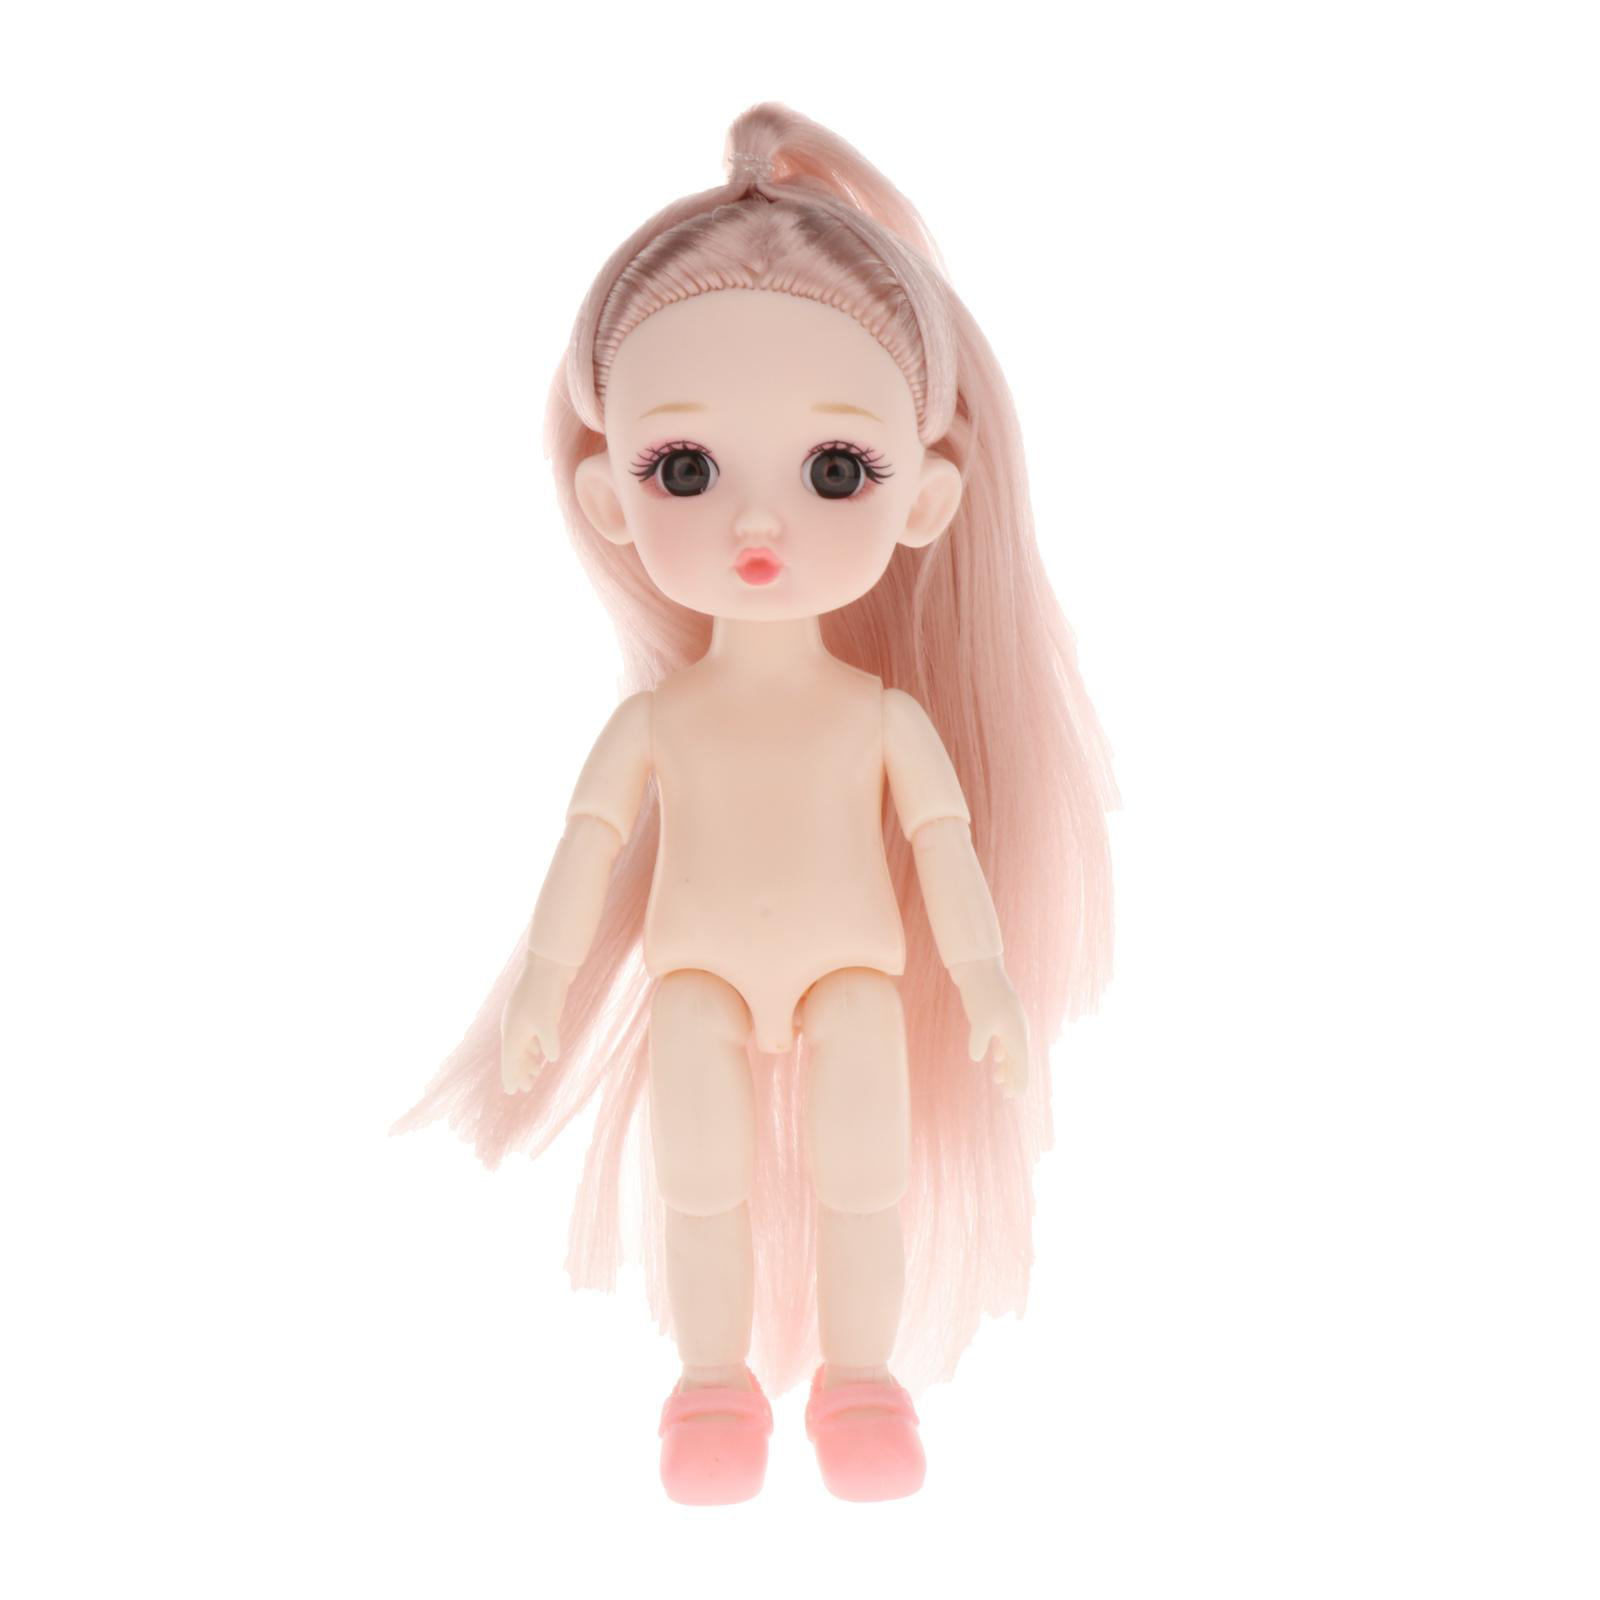 Nude 1/6 12 inch BJD Doll Moveable Ball Jointed Body Face Makeup Lifelike Toys